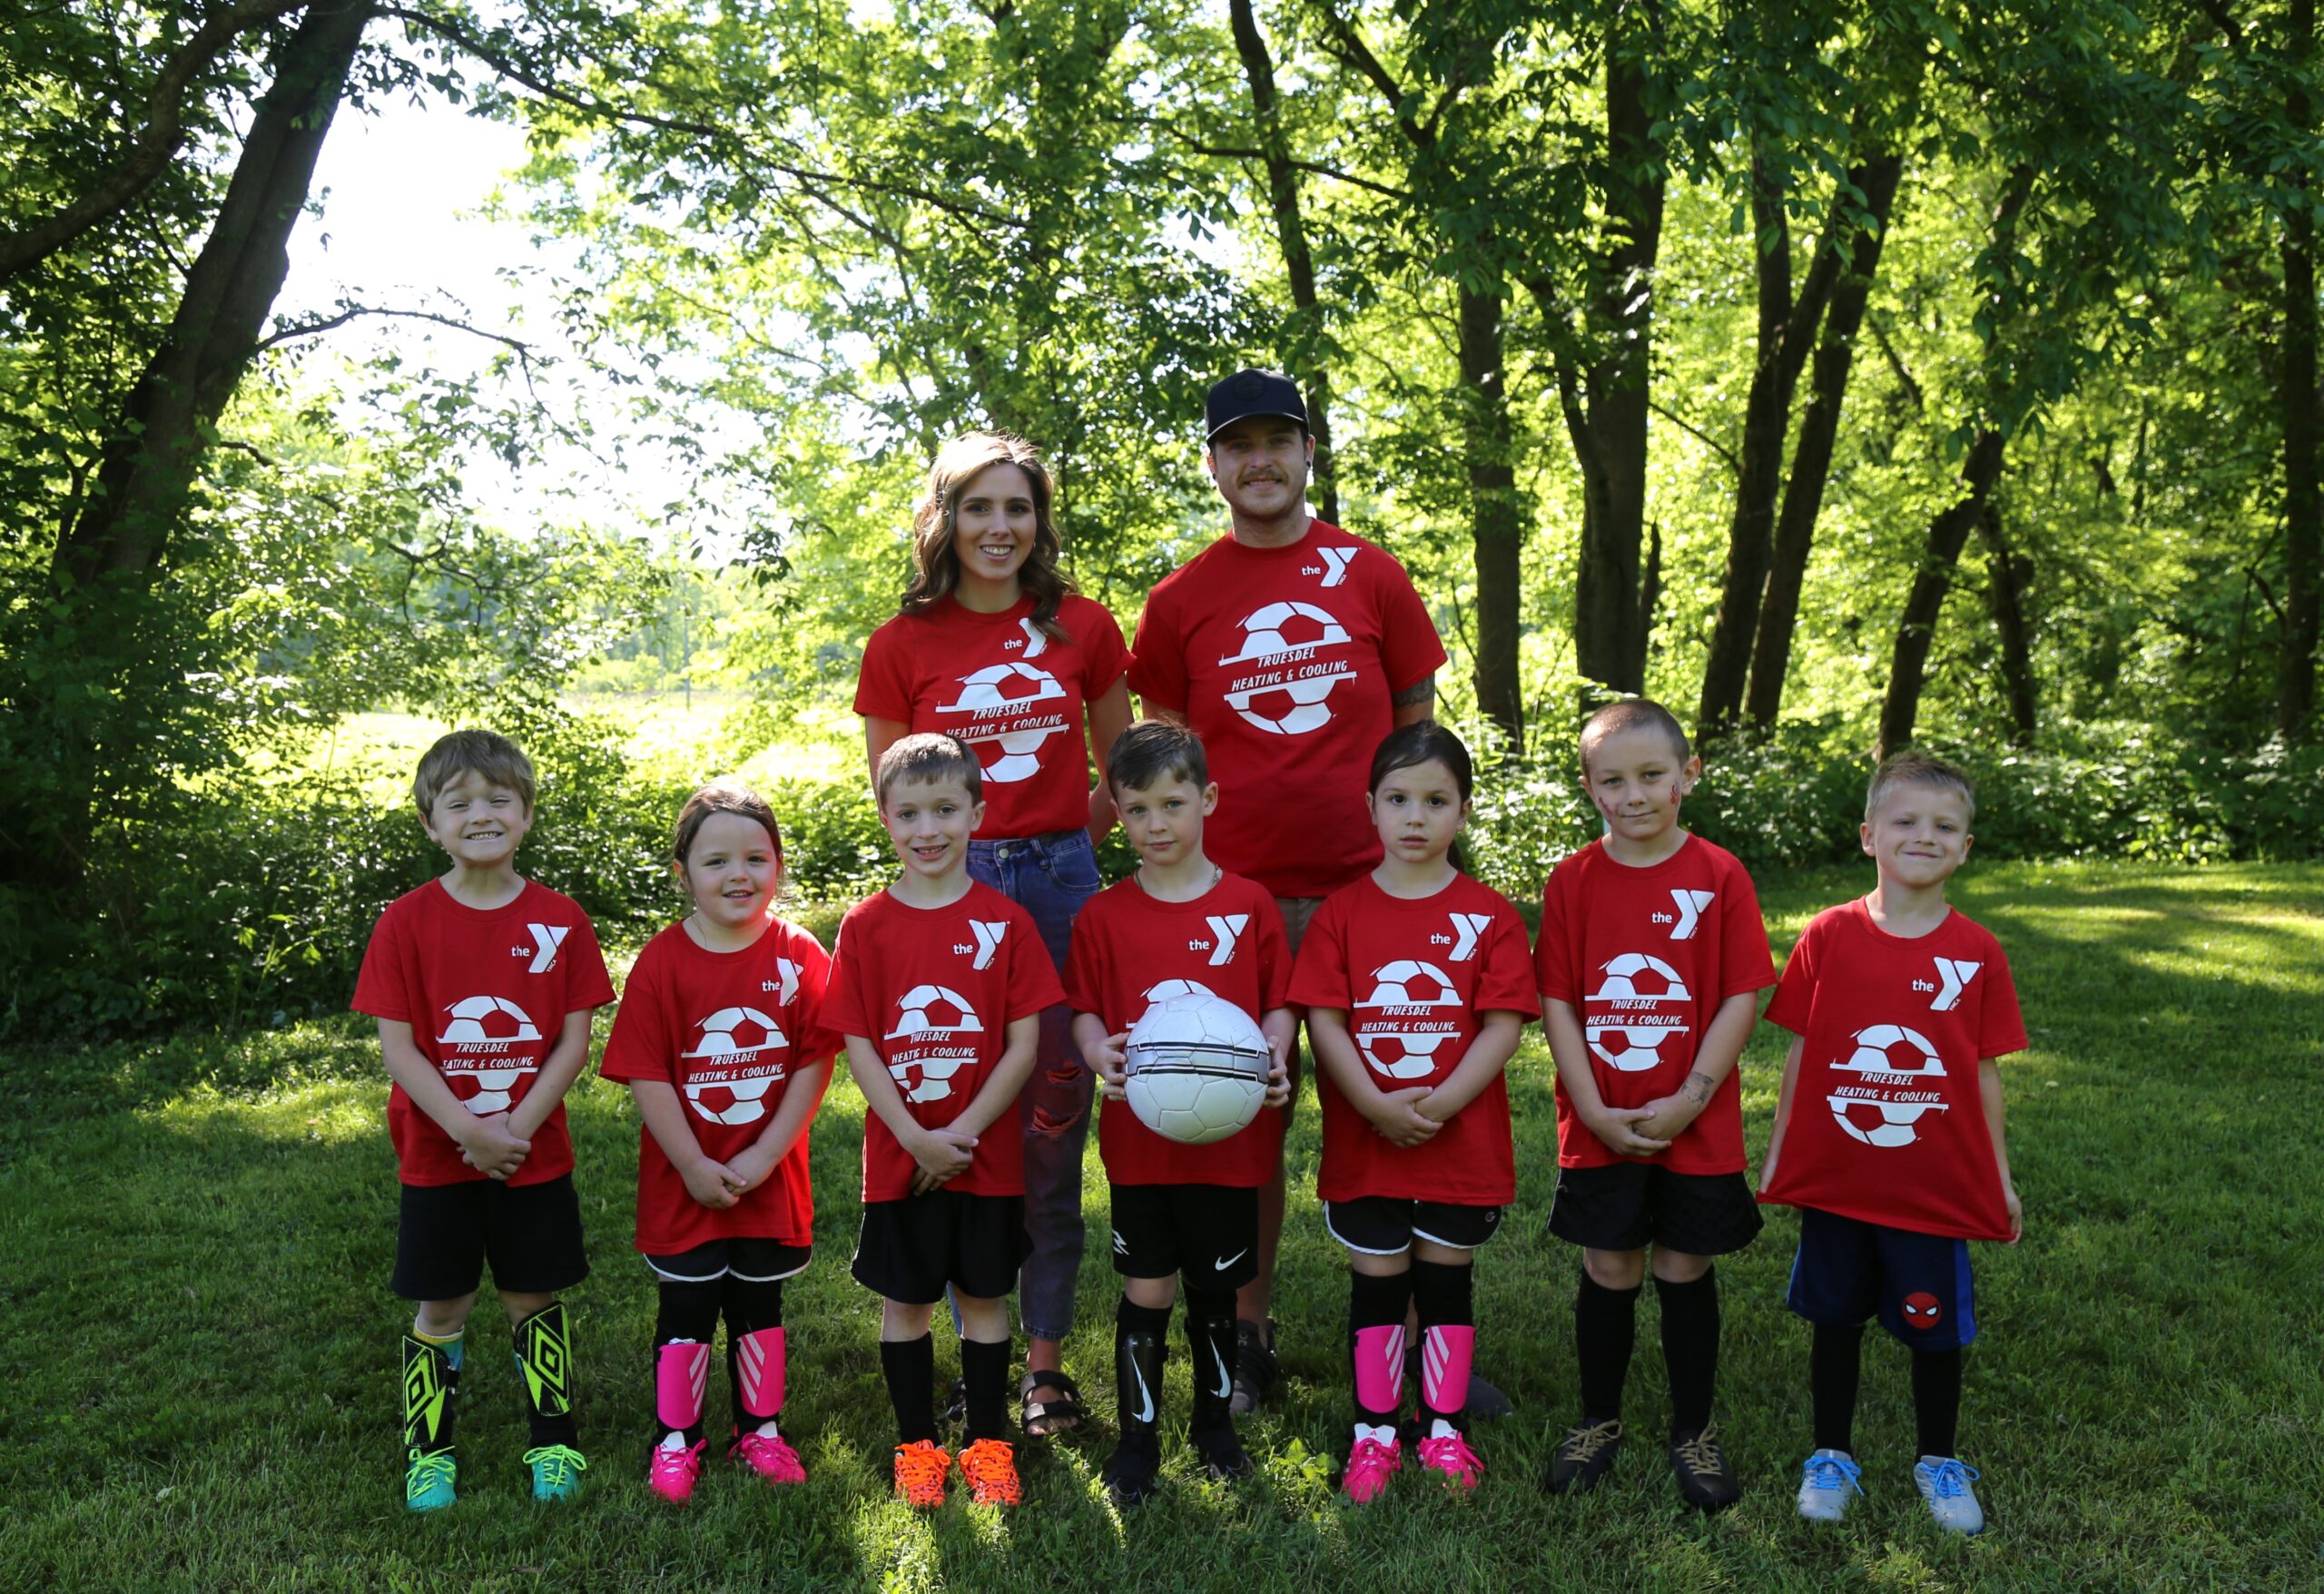 Truesdel Heating & Cooling Youth Soccer Team